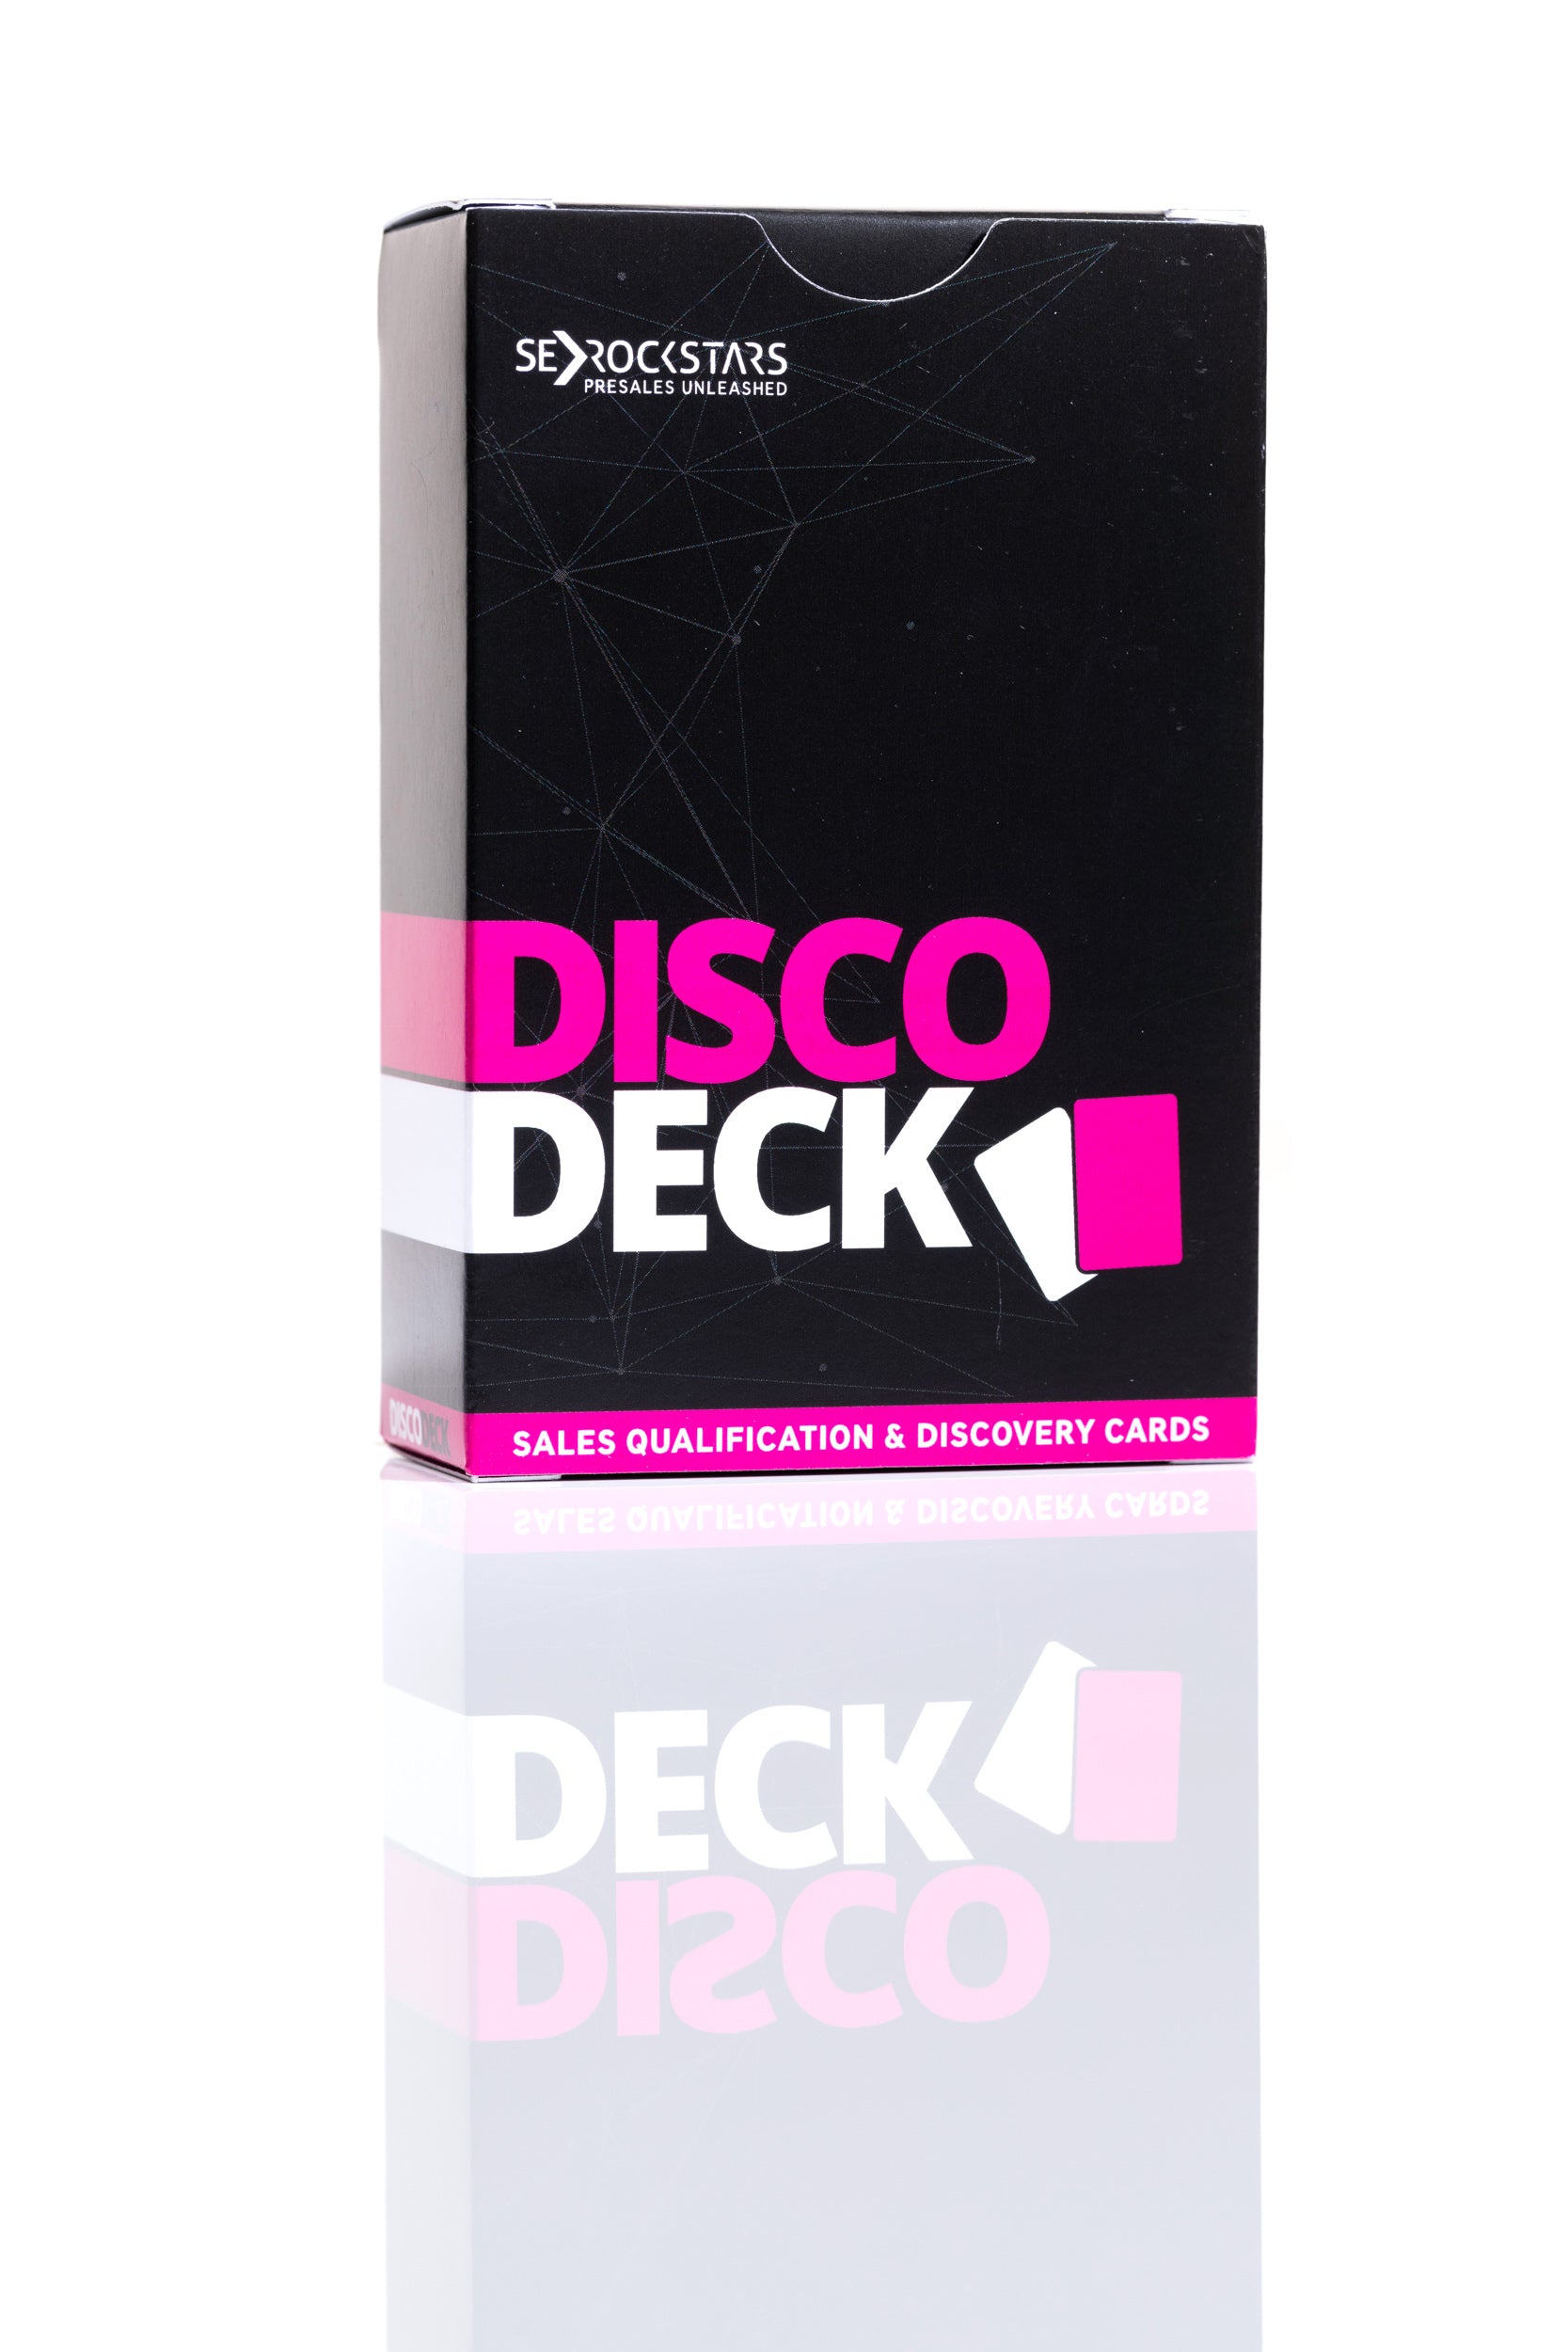 The Disco Deck - Sales Qualification & Discovery Cards